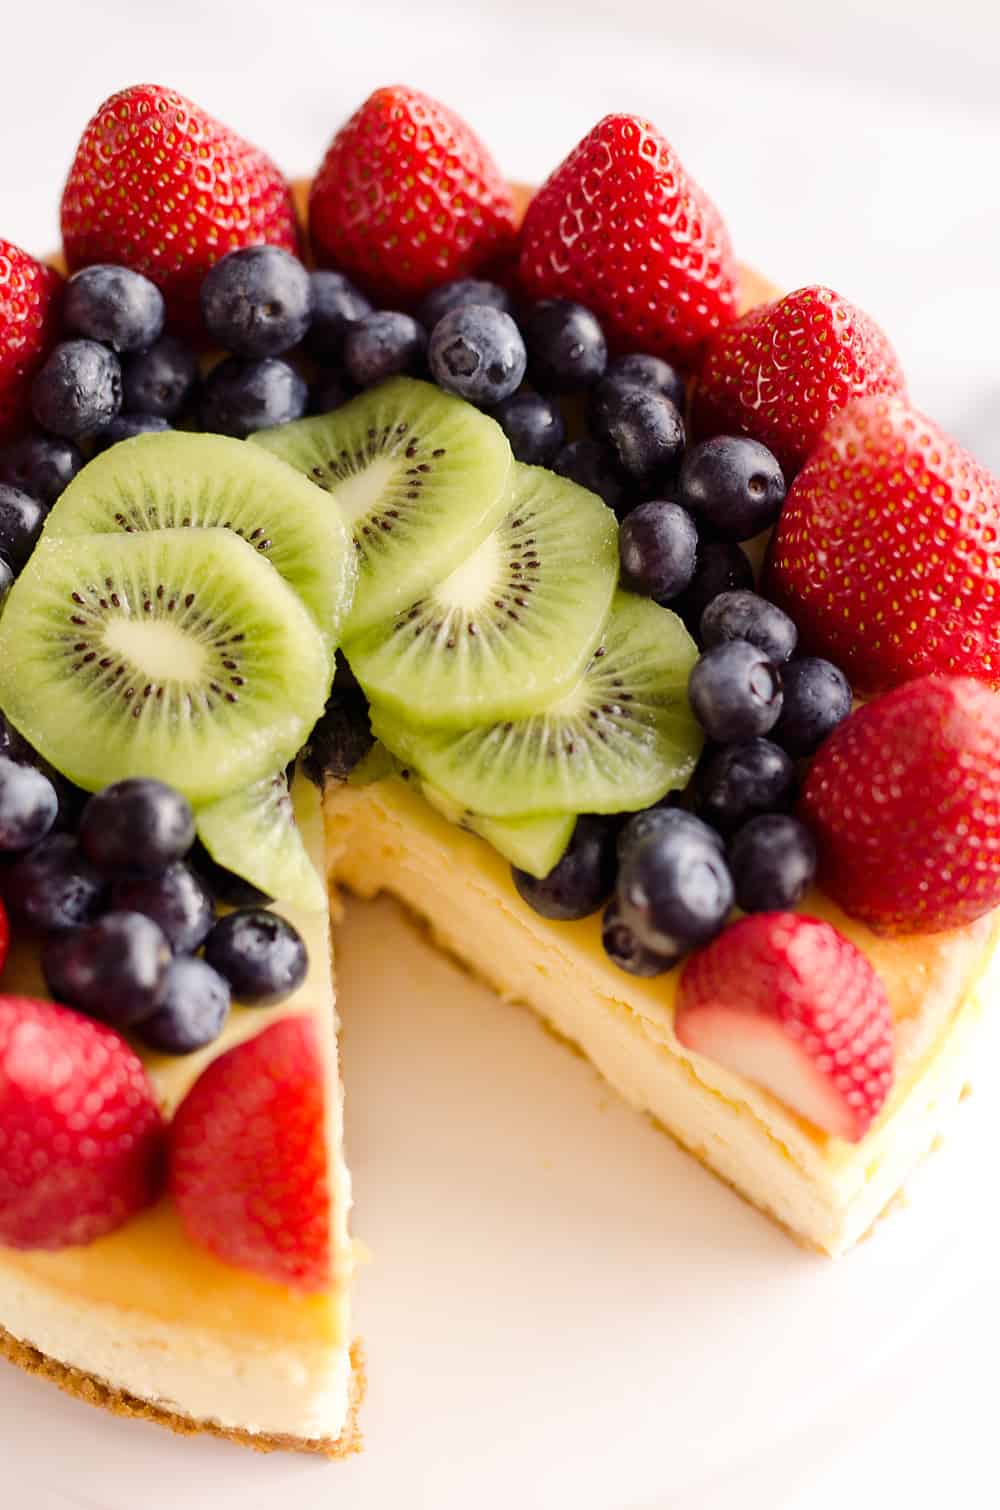 Creamy New York Cheesecake with Fresh Fruit is a rich and decadent dessert recipe that is sure to impress all your dinner guests! 